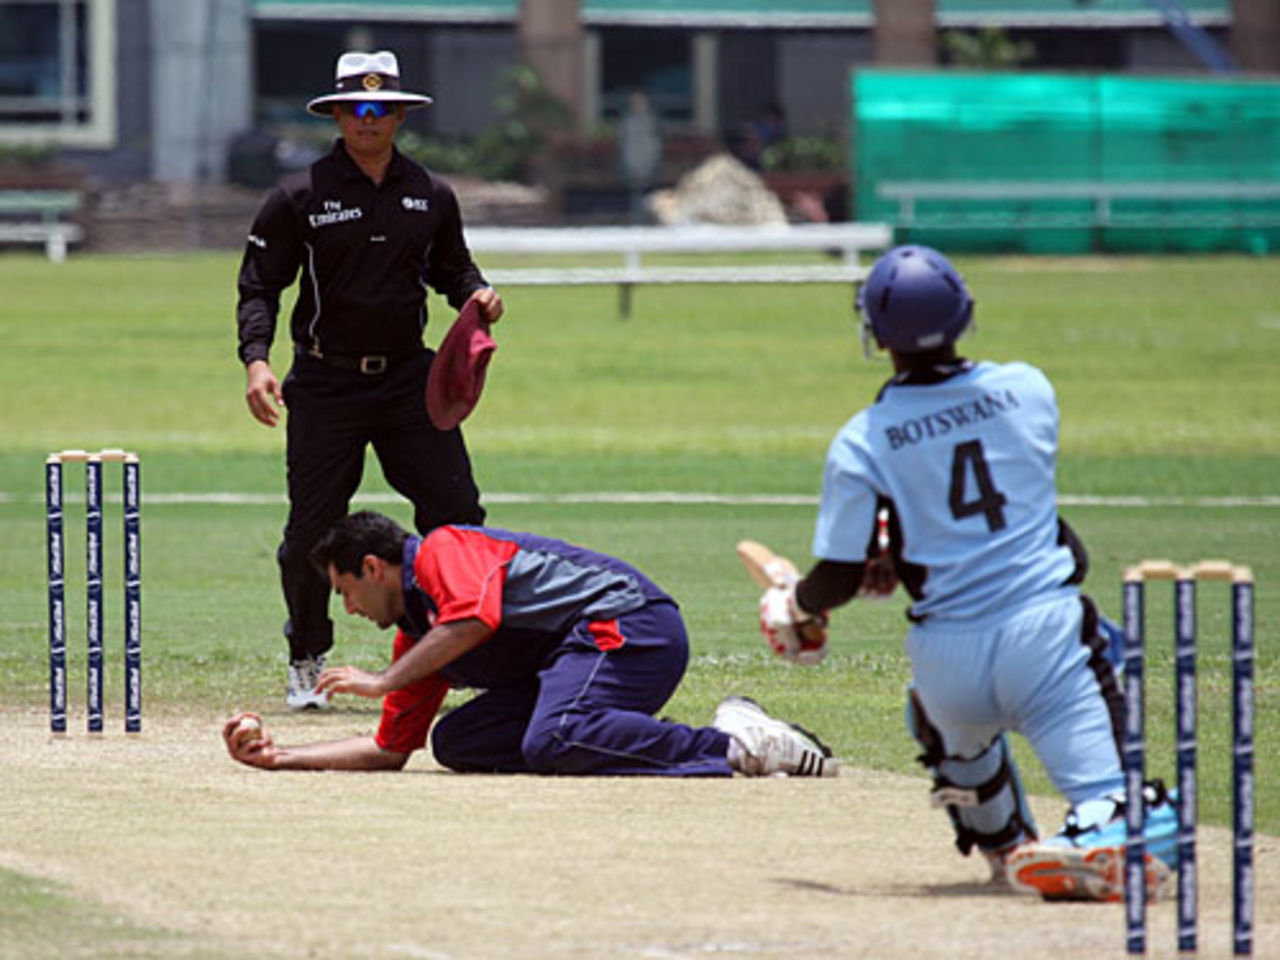 Denzil Sequeira is caught and bowled by Yaser Sadeq, Bahrain v Botswana, ICC World Cricket League Division 6, Singapore, September 2, 2009